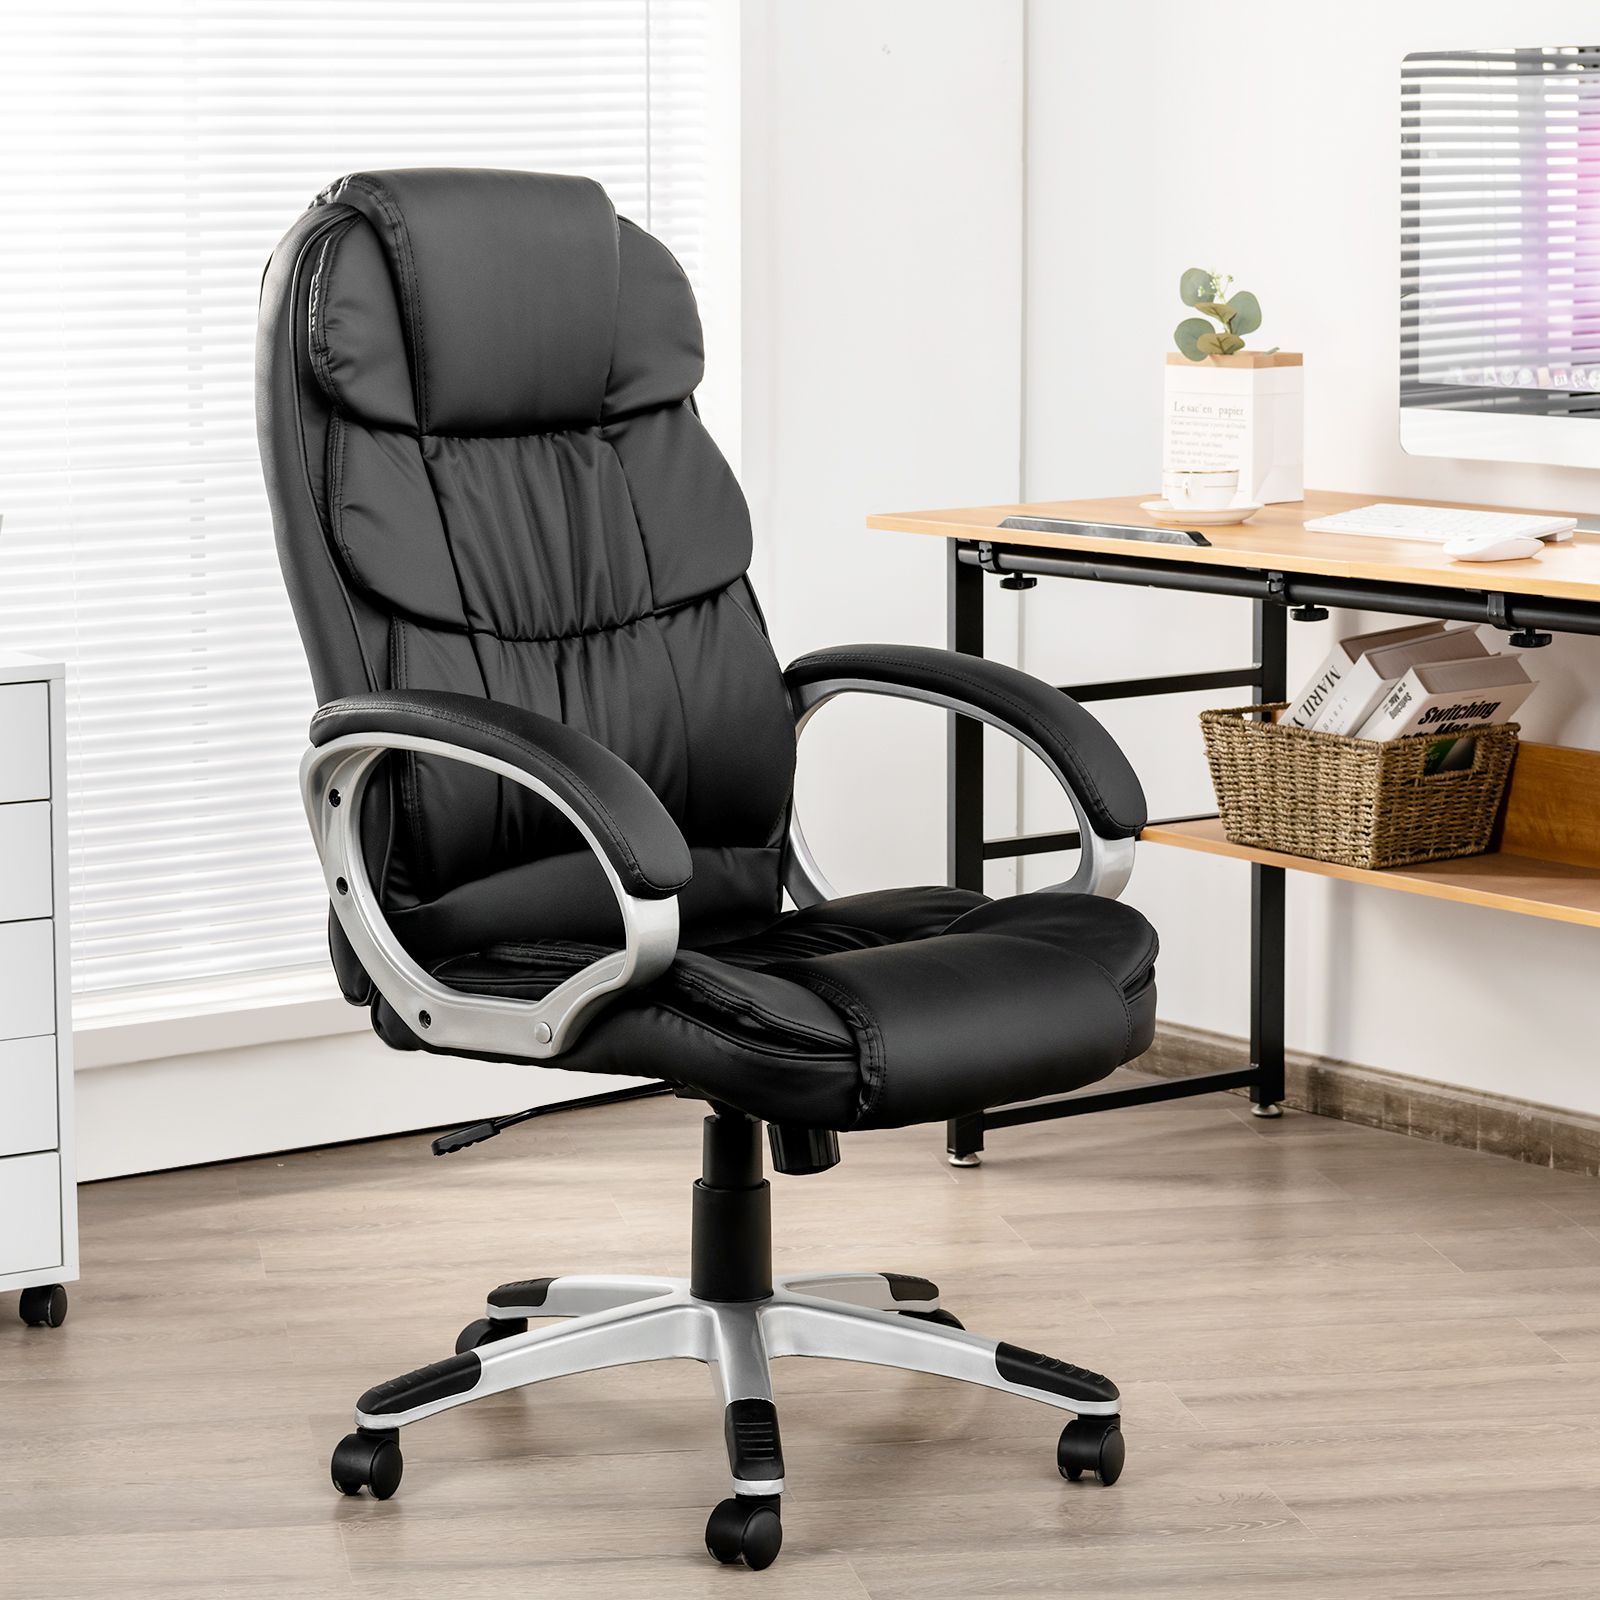 Executive Office Chair with Adjustable Height for Home Office Meeting Room